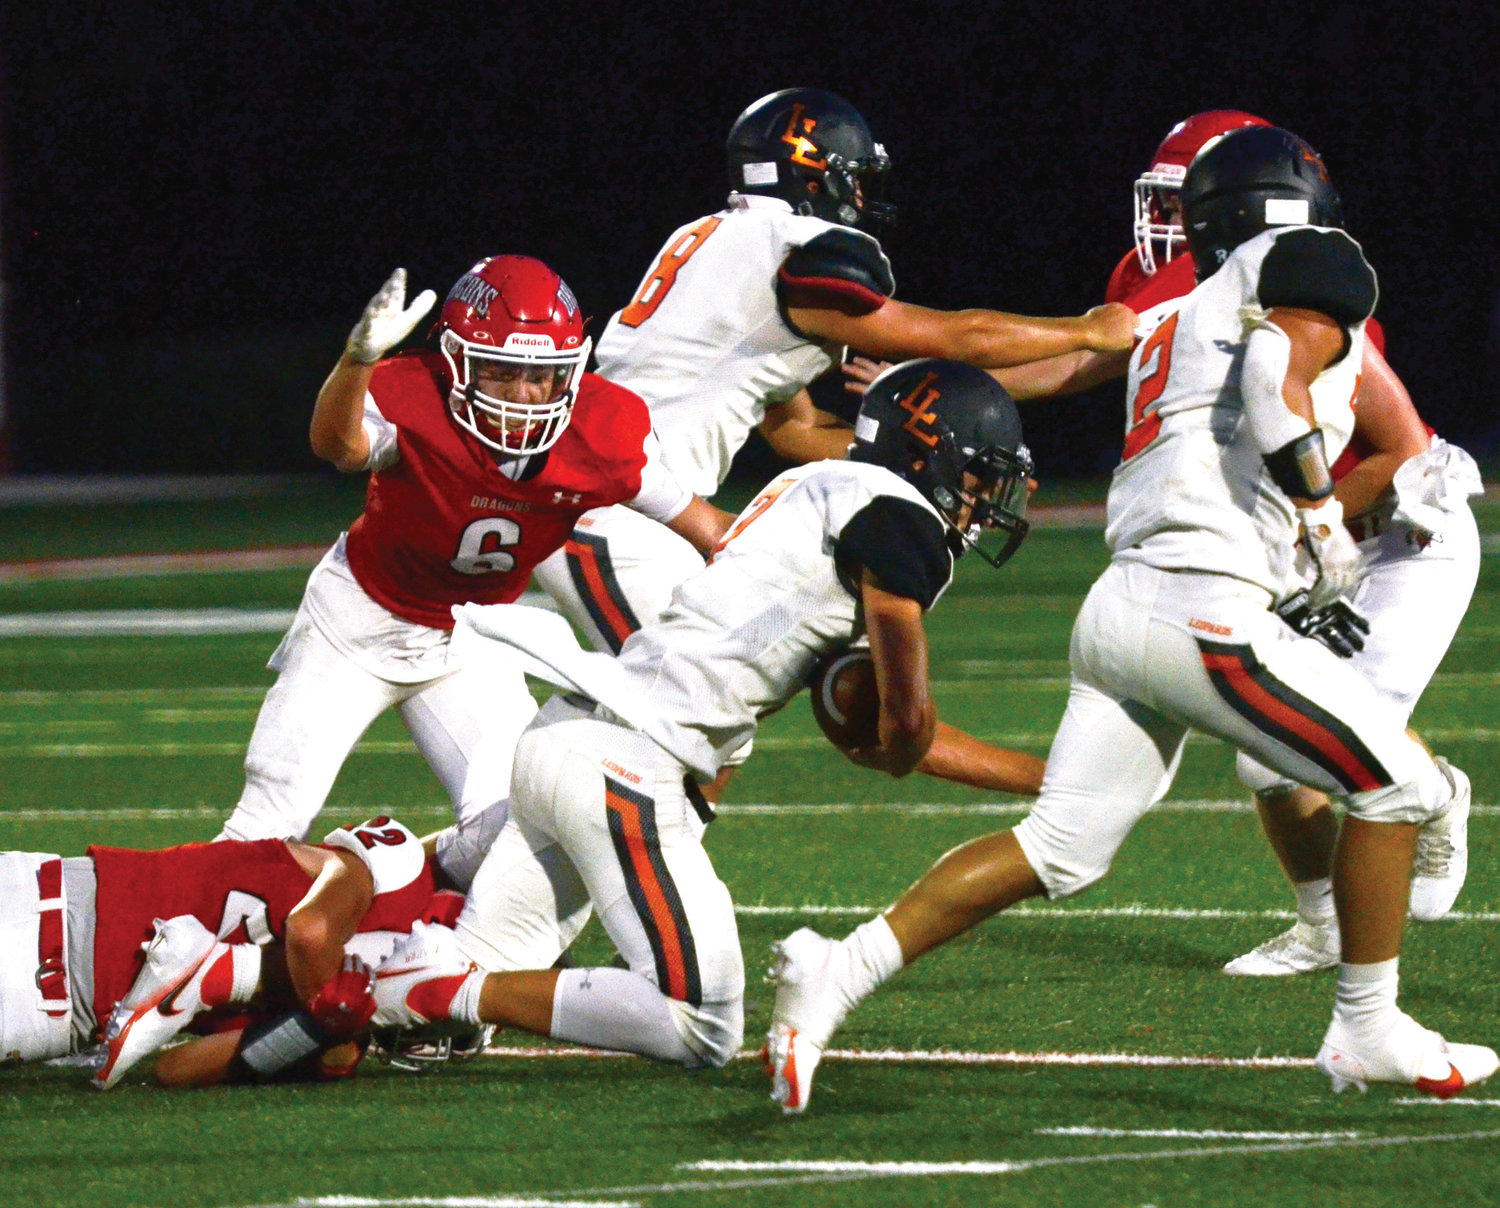 Purcell freshman Kash Guthmueller (6) goes airborn to finish off a Lindsay runner after Payson Purcell (22) grabbed his legs. The Dragons defeated the Leopards 20-14. They travel to Meeker Friday for a 7 p.m. kickoff.